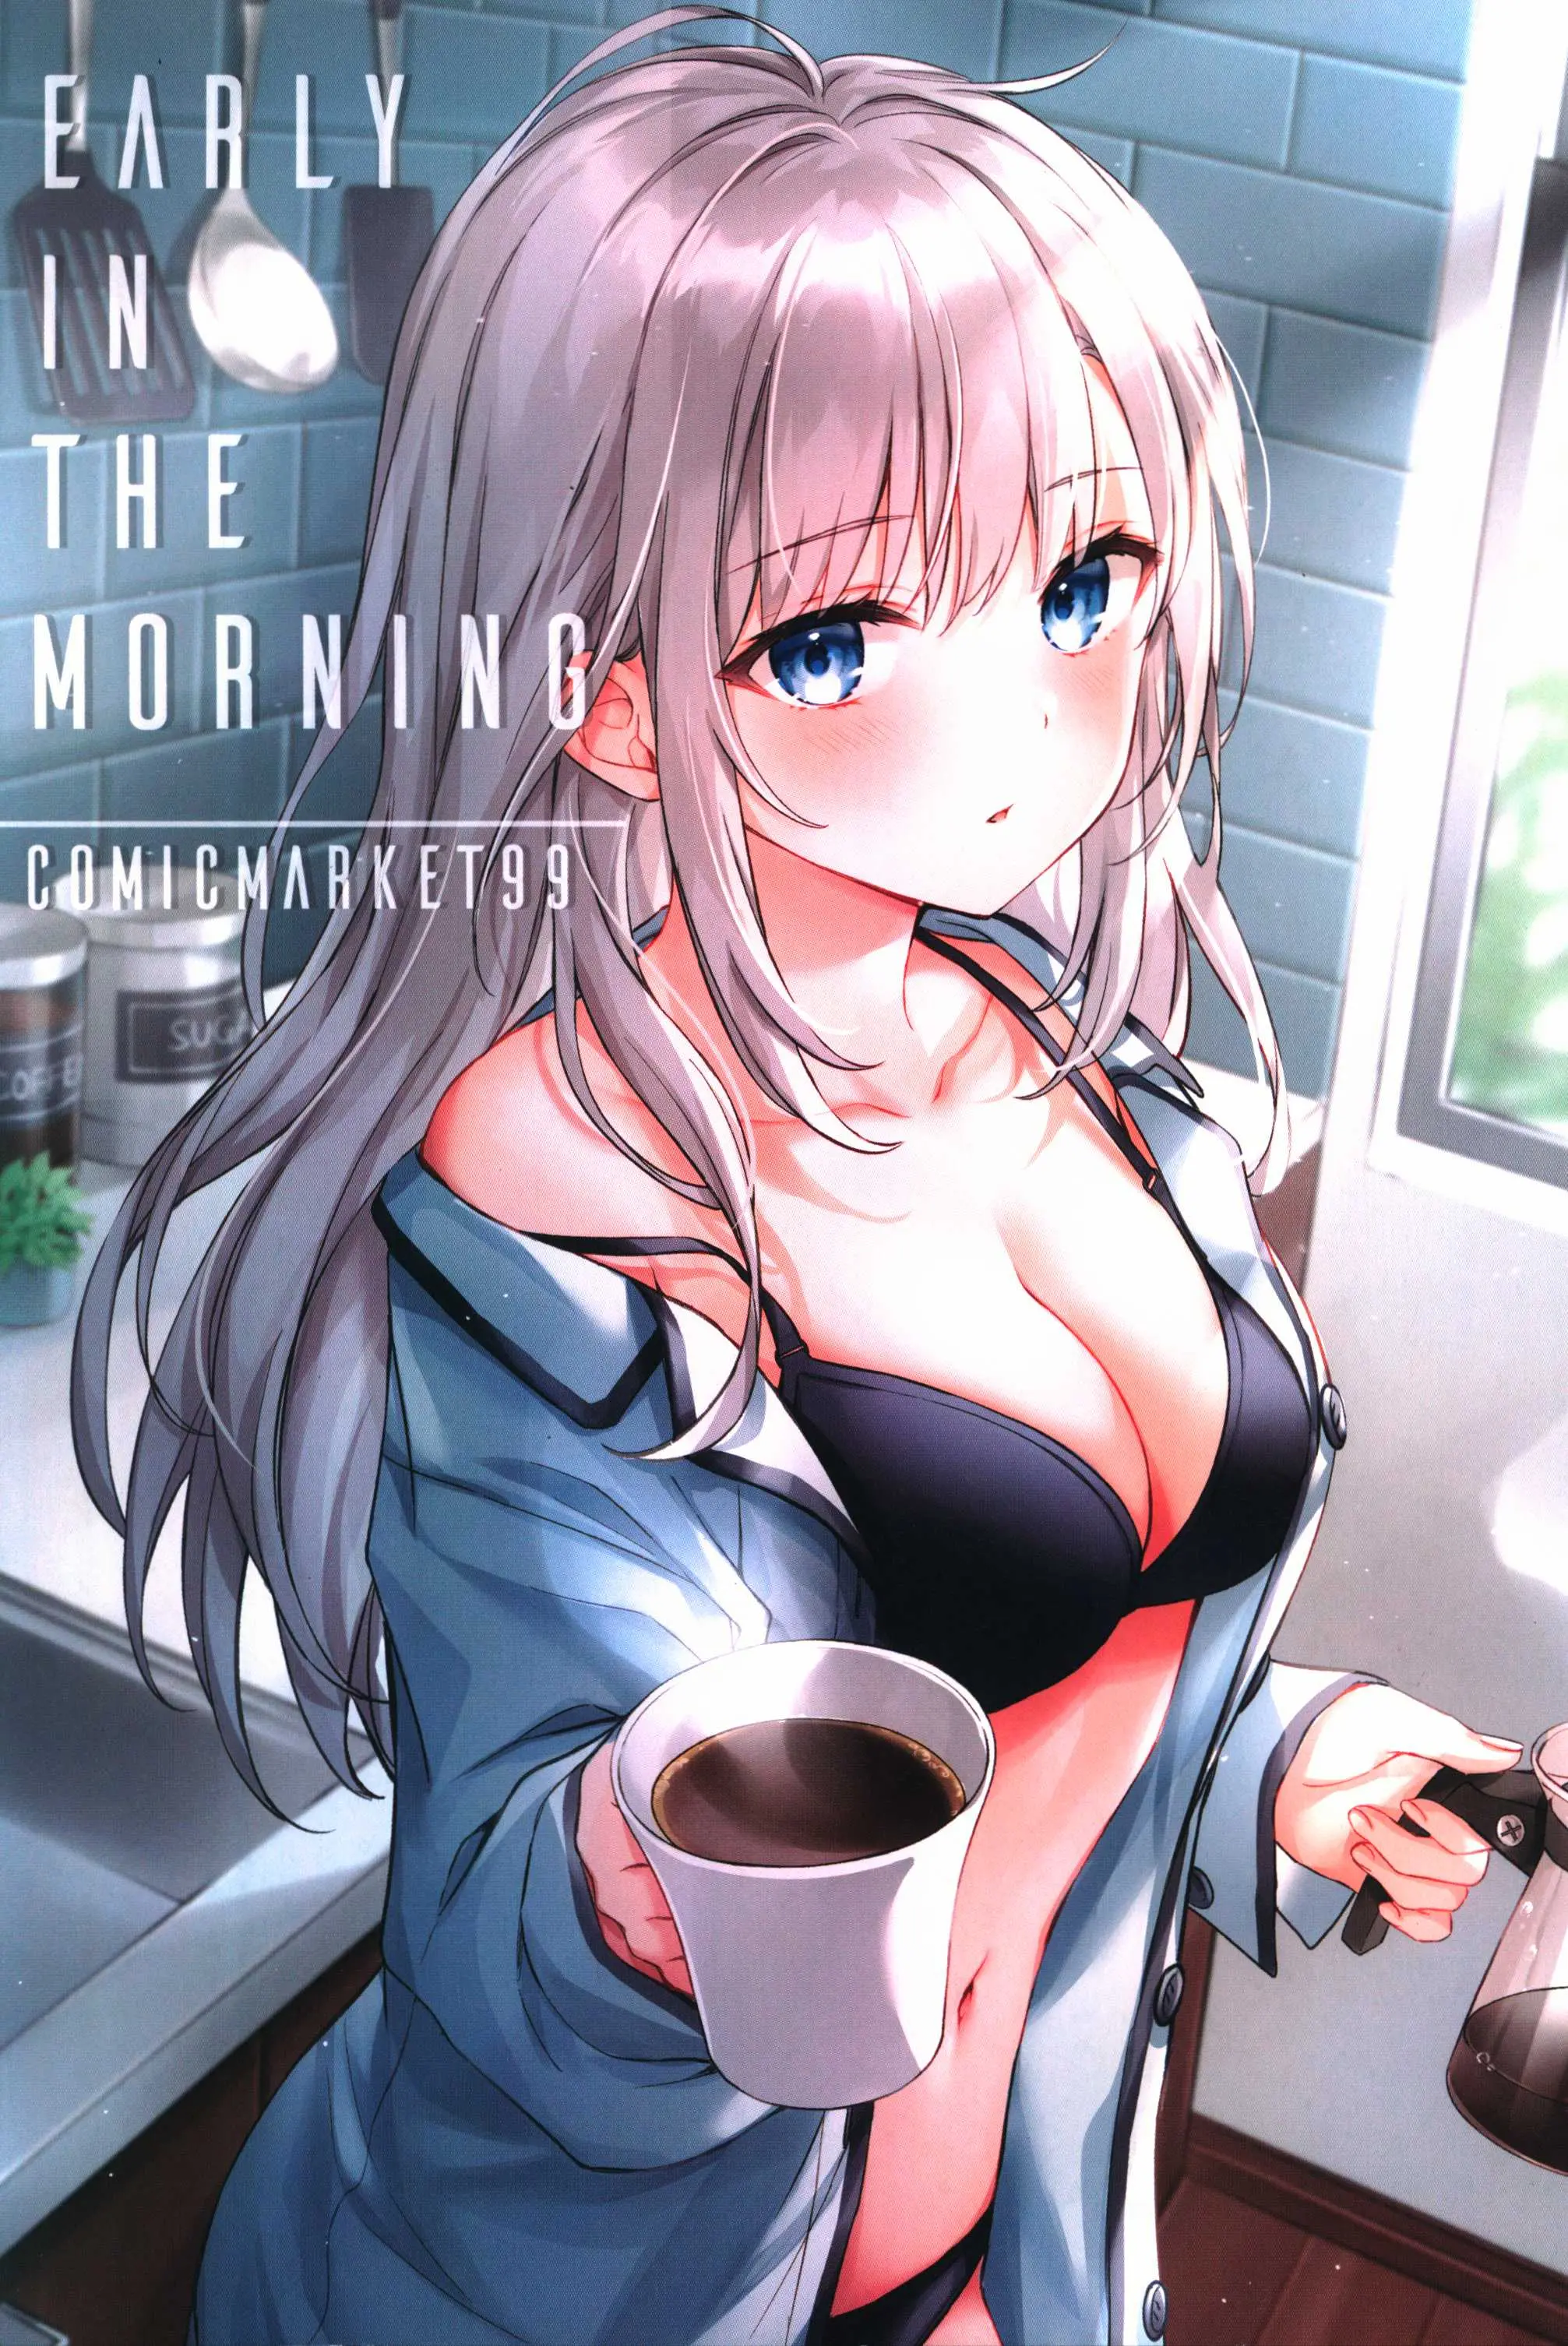 Doujinshi - Early in The Morning (「オリジナル」 EARLY IN THE MORNING) / neko no niwa